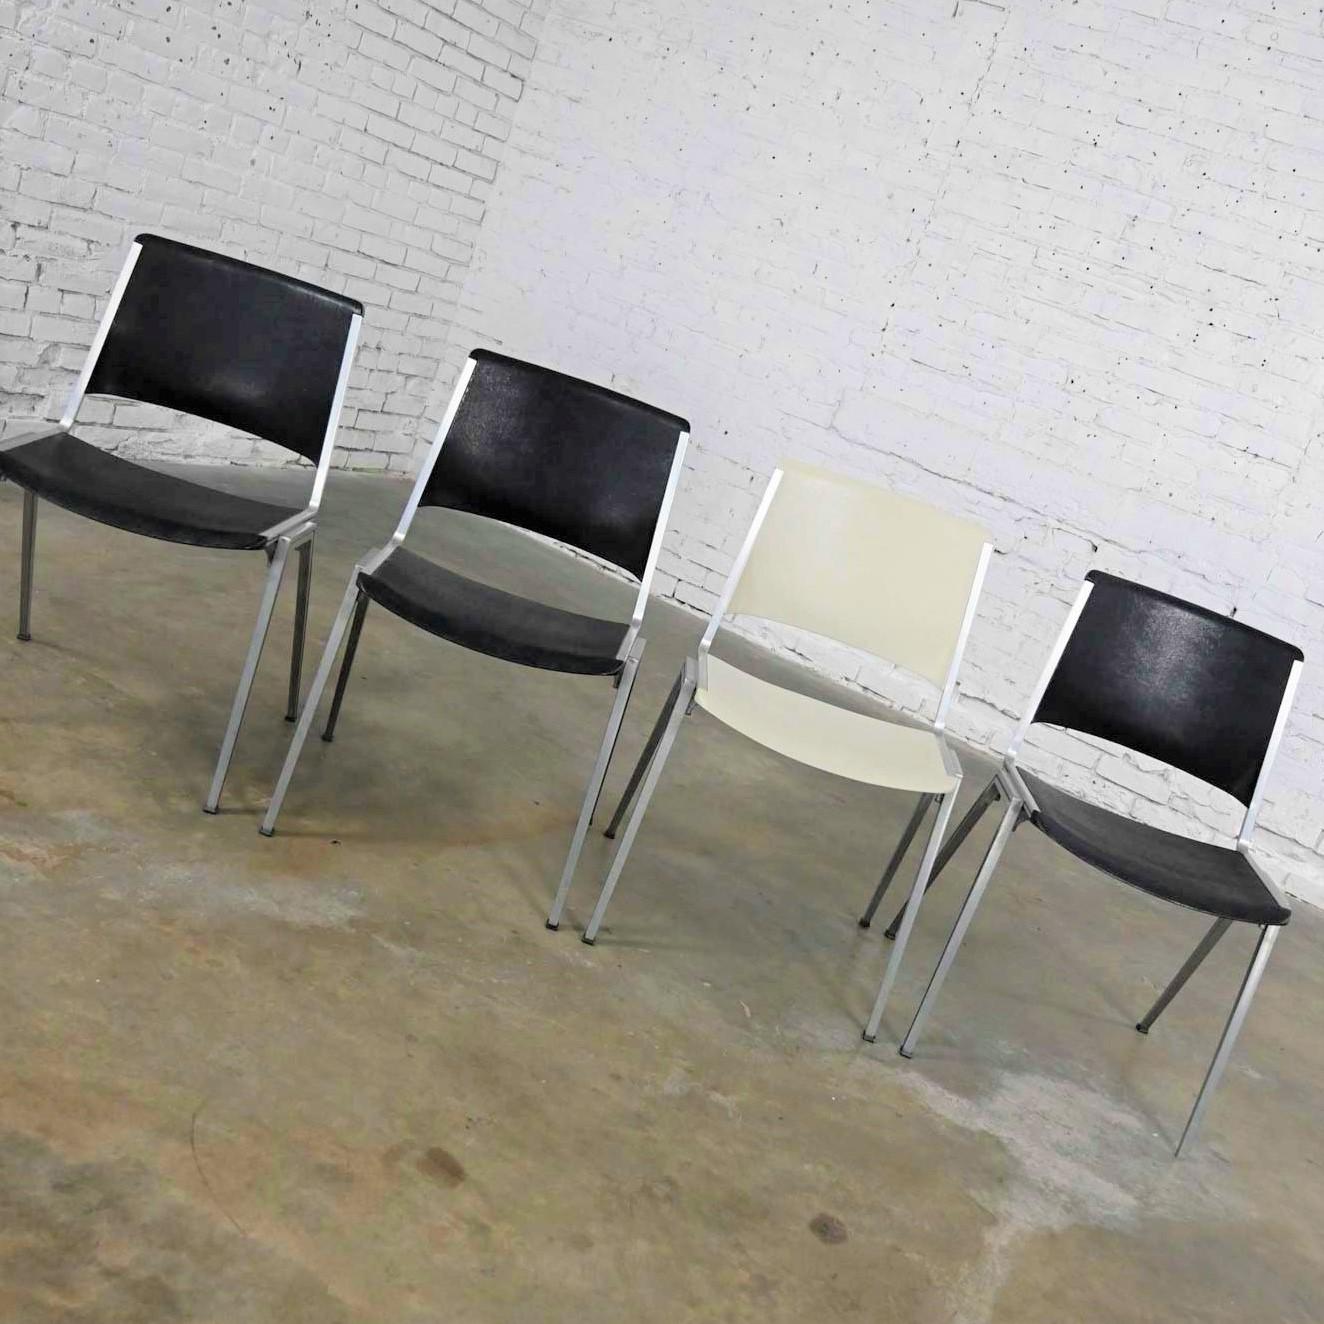 Gorgeous vintage steelcase stacking chairs model #1278 1 white & 1 black set of 4. Great Mid-century modern industrial look. Comprised of extruded aluminum frames and molded plastic seat and backs. Beautiful condition, keeping in mind that these are